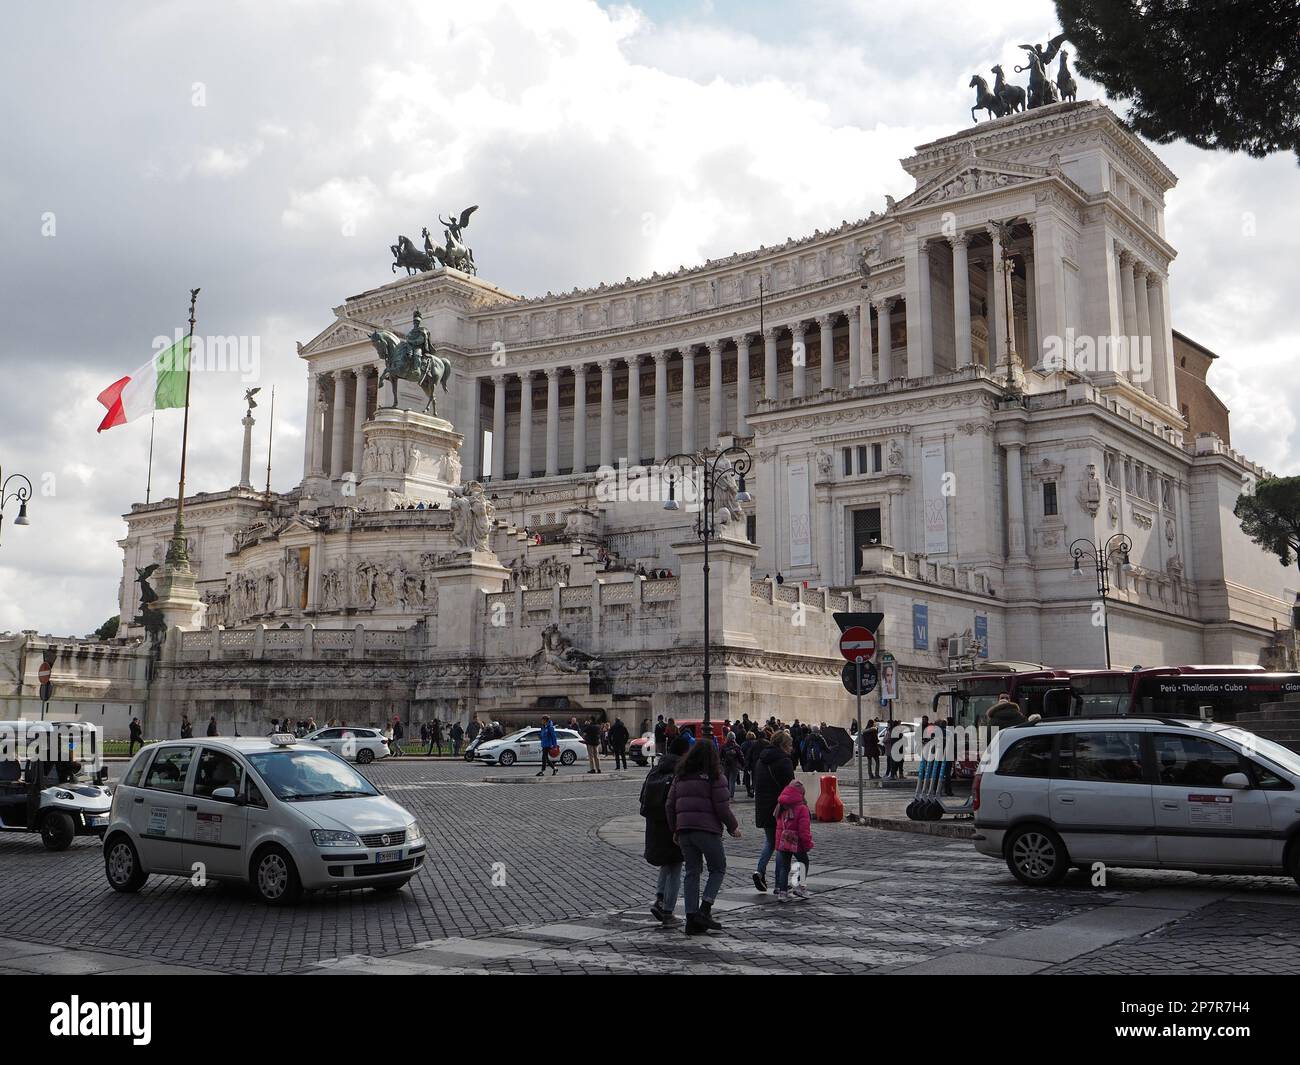 The Victor Emmanuel II National Monument also known as the altar of the fatherland, honors the first king of the unified Italy. Piazza Venezia, Rome, Stock Photo